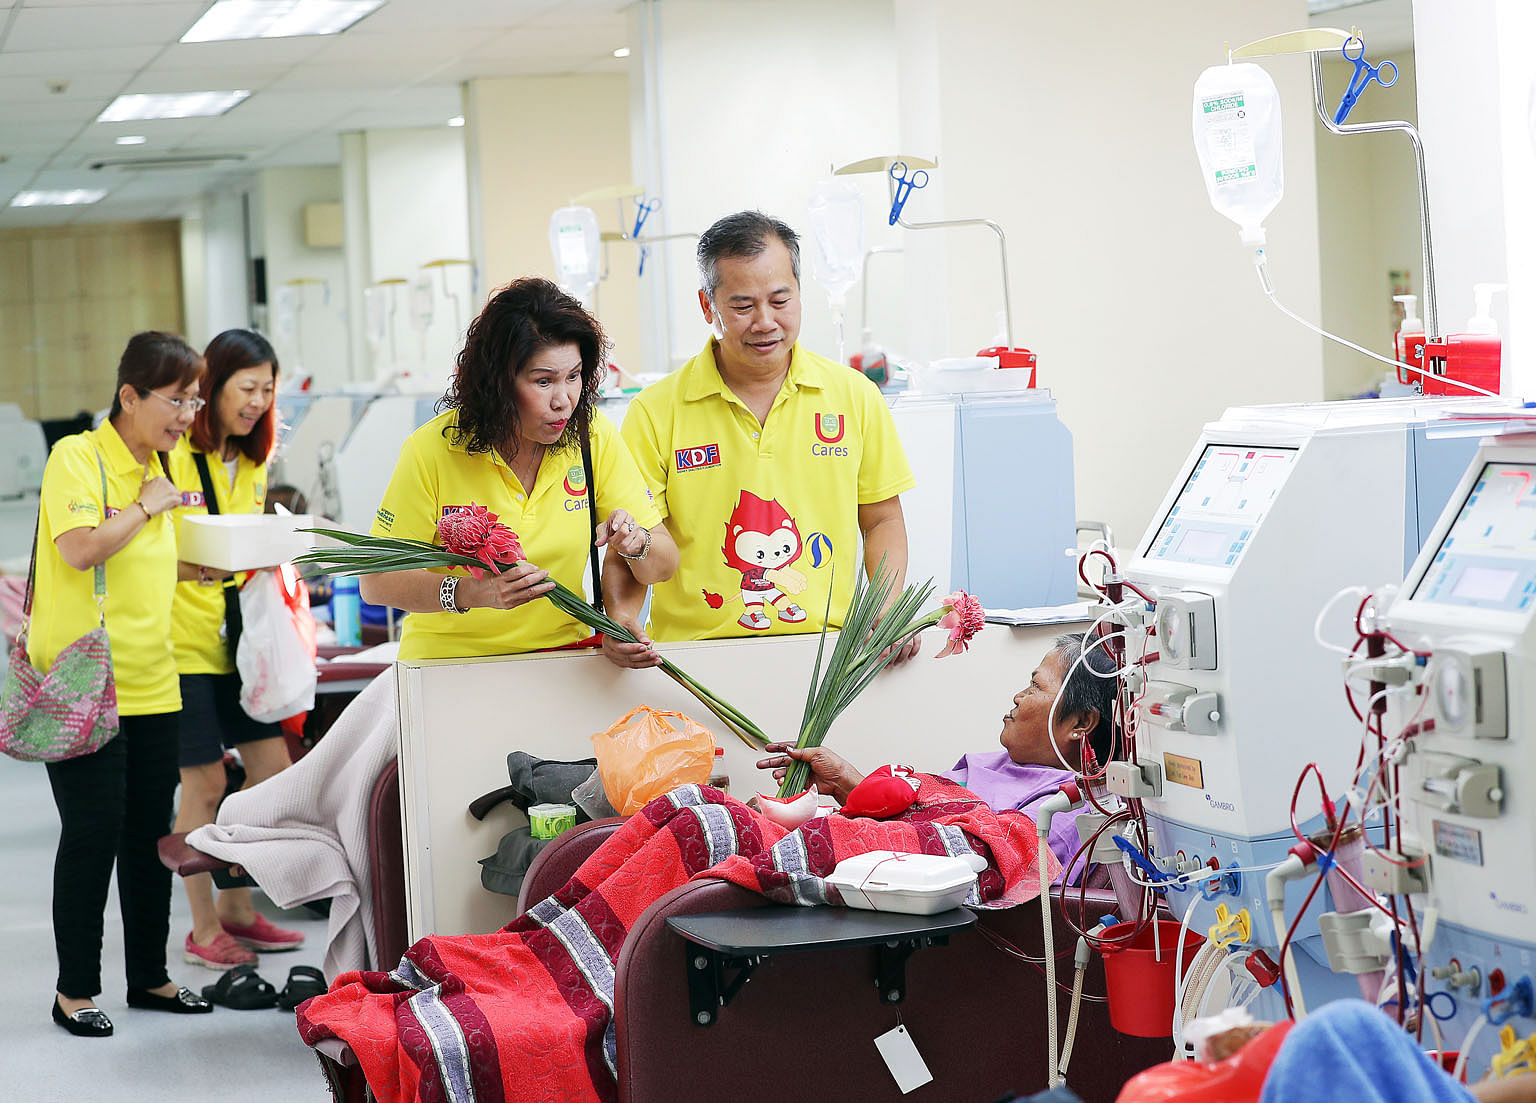 Ms Nancy Khoo and Mr Johnson Ong visiting Madam Ruhaya Mohd Noor, 58, who is receiving dialysis at the Kidney Dialysis Foundation.